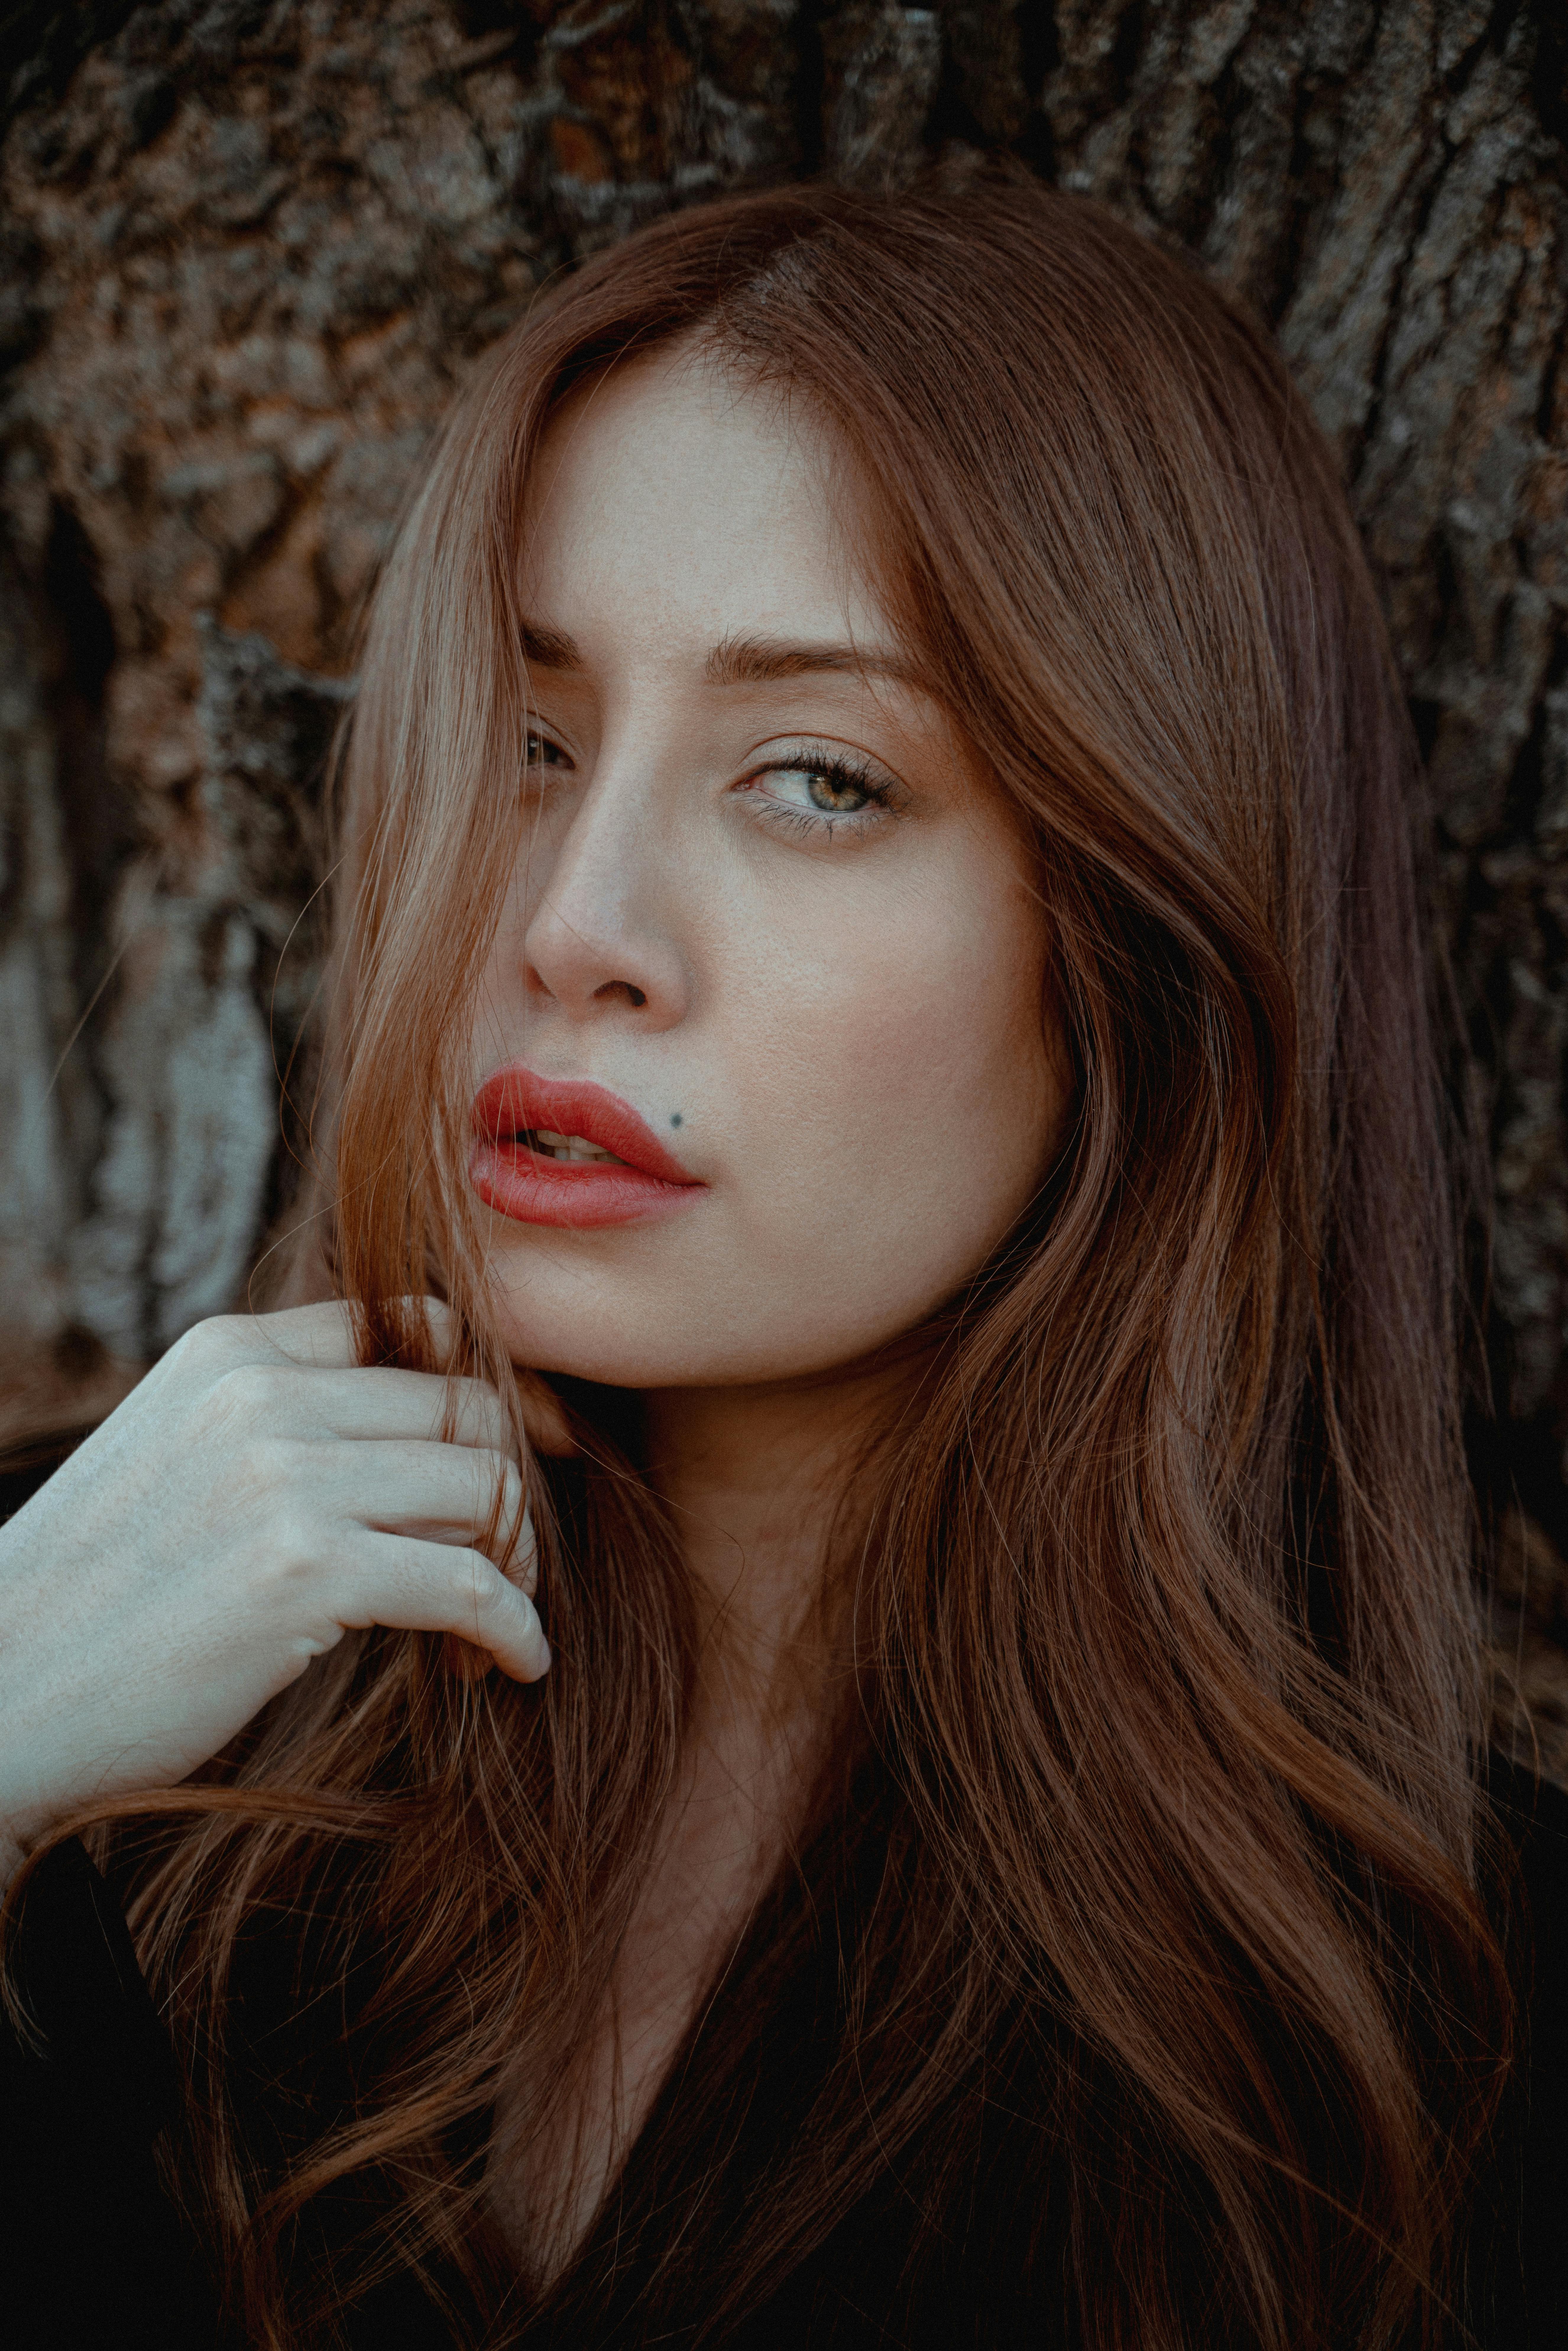 Image Of Red Haired Teenage Girl 14 15 With Pale Skin And Freckles